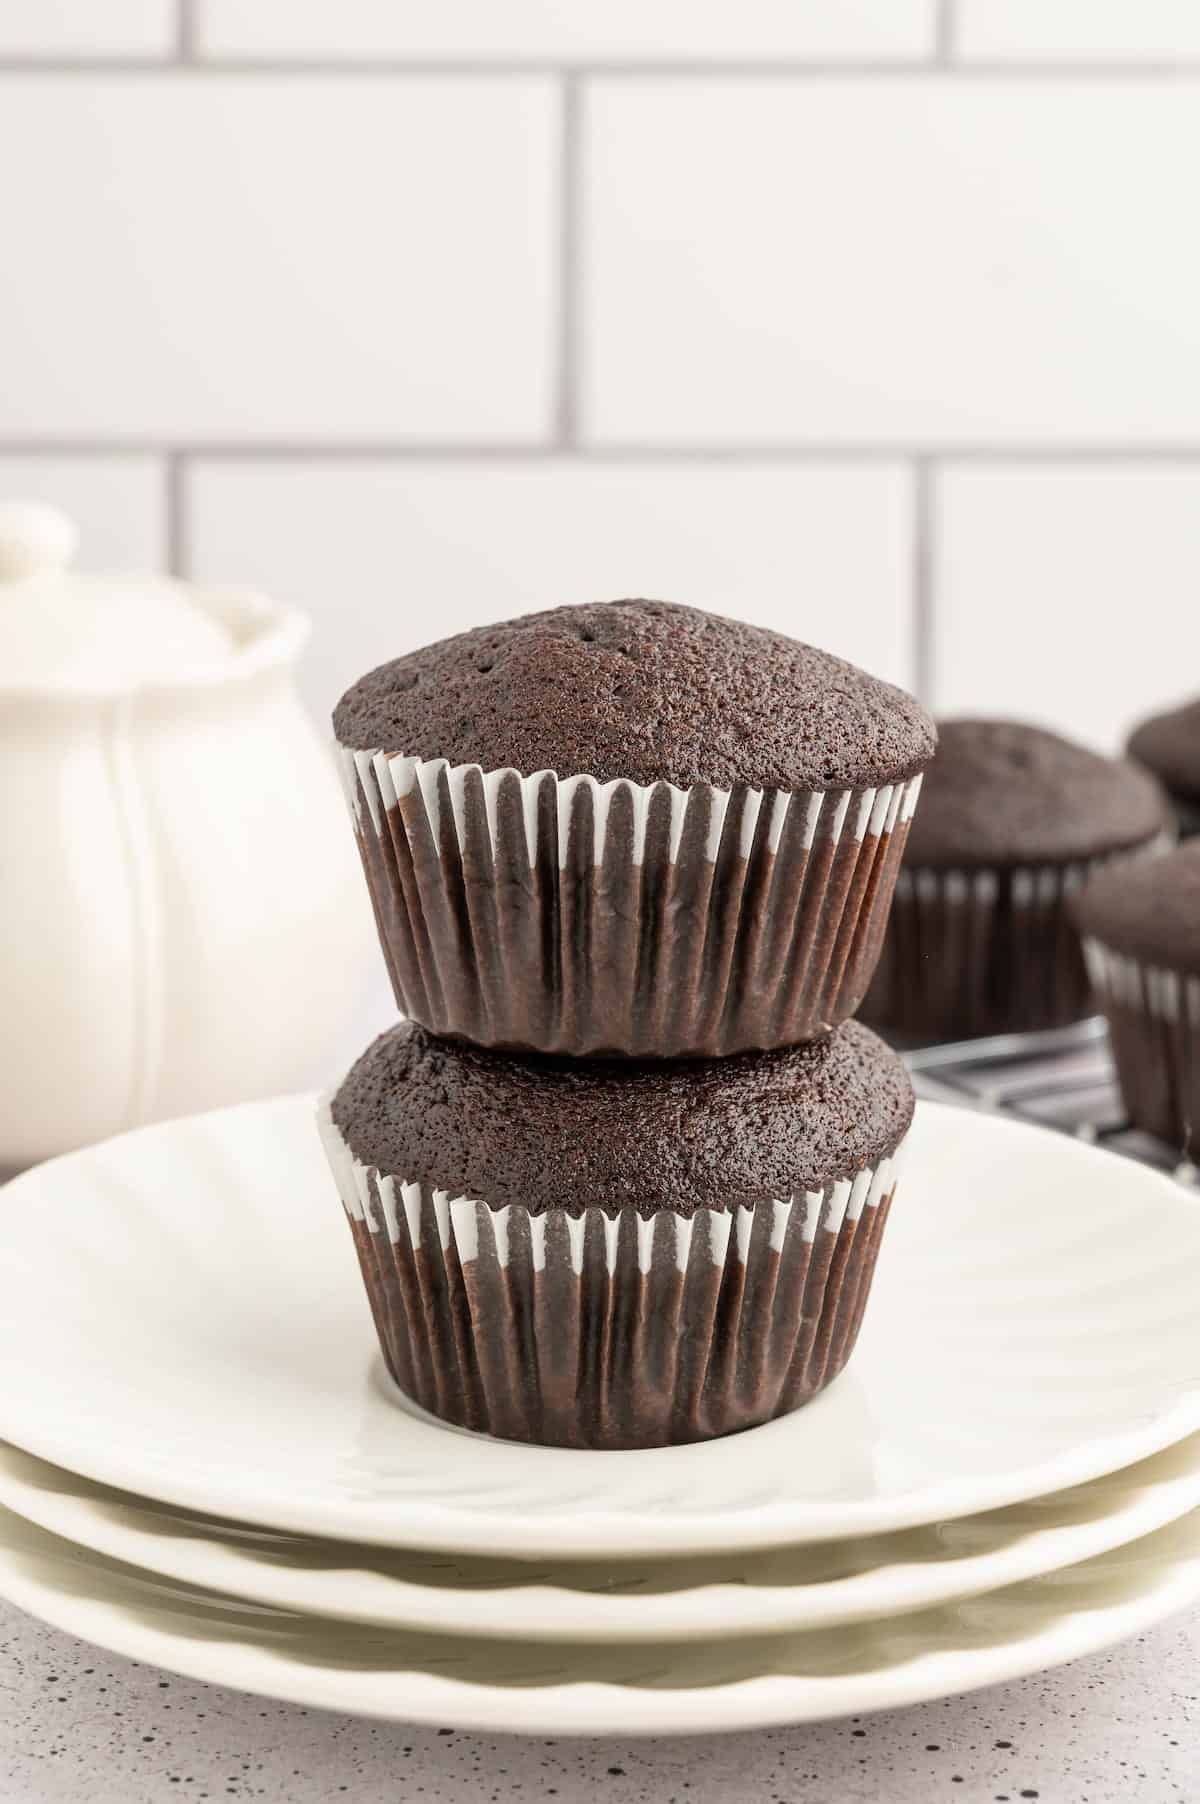 Two vegan chocolate cupcakes in liners stacked on a plate.